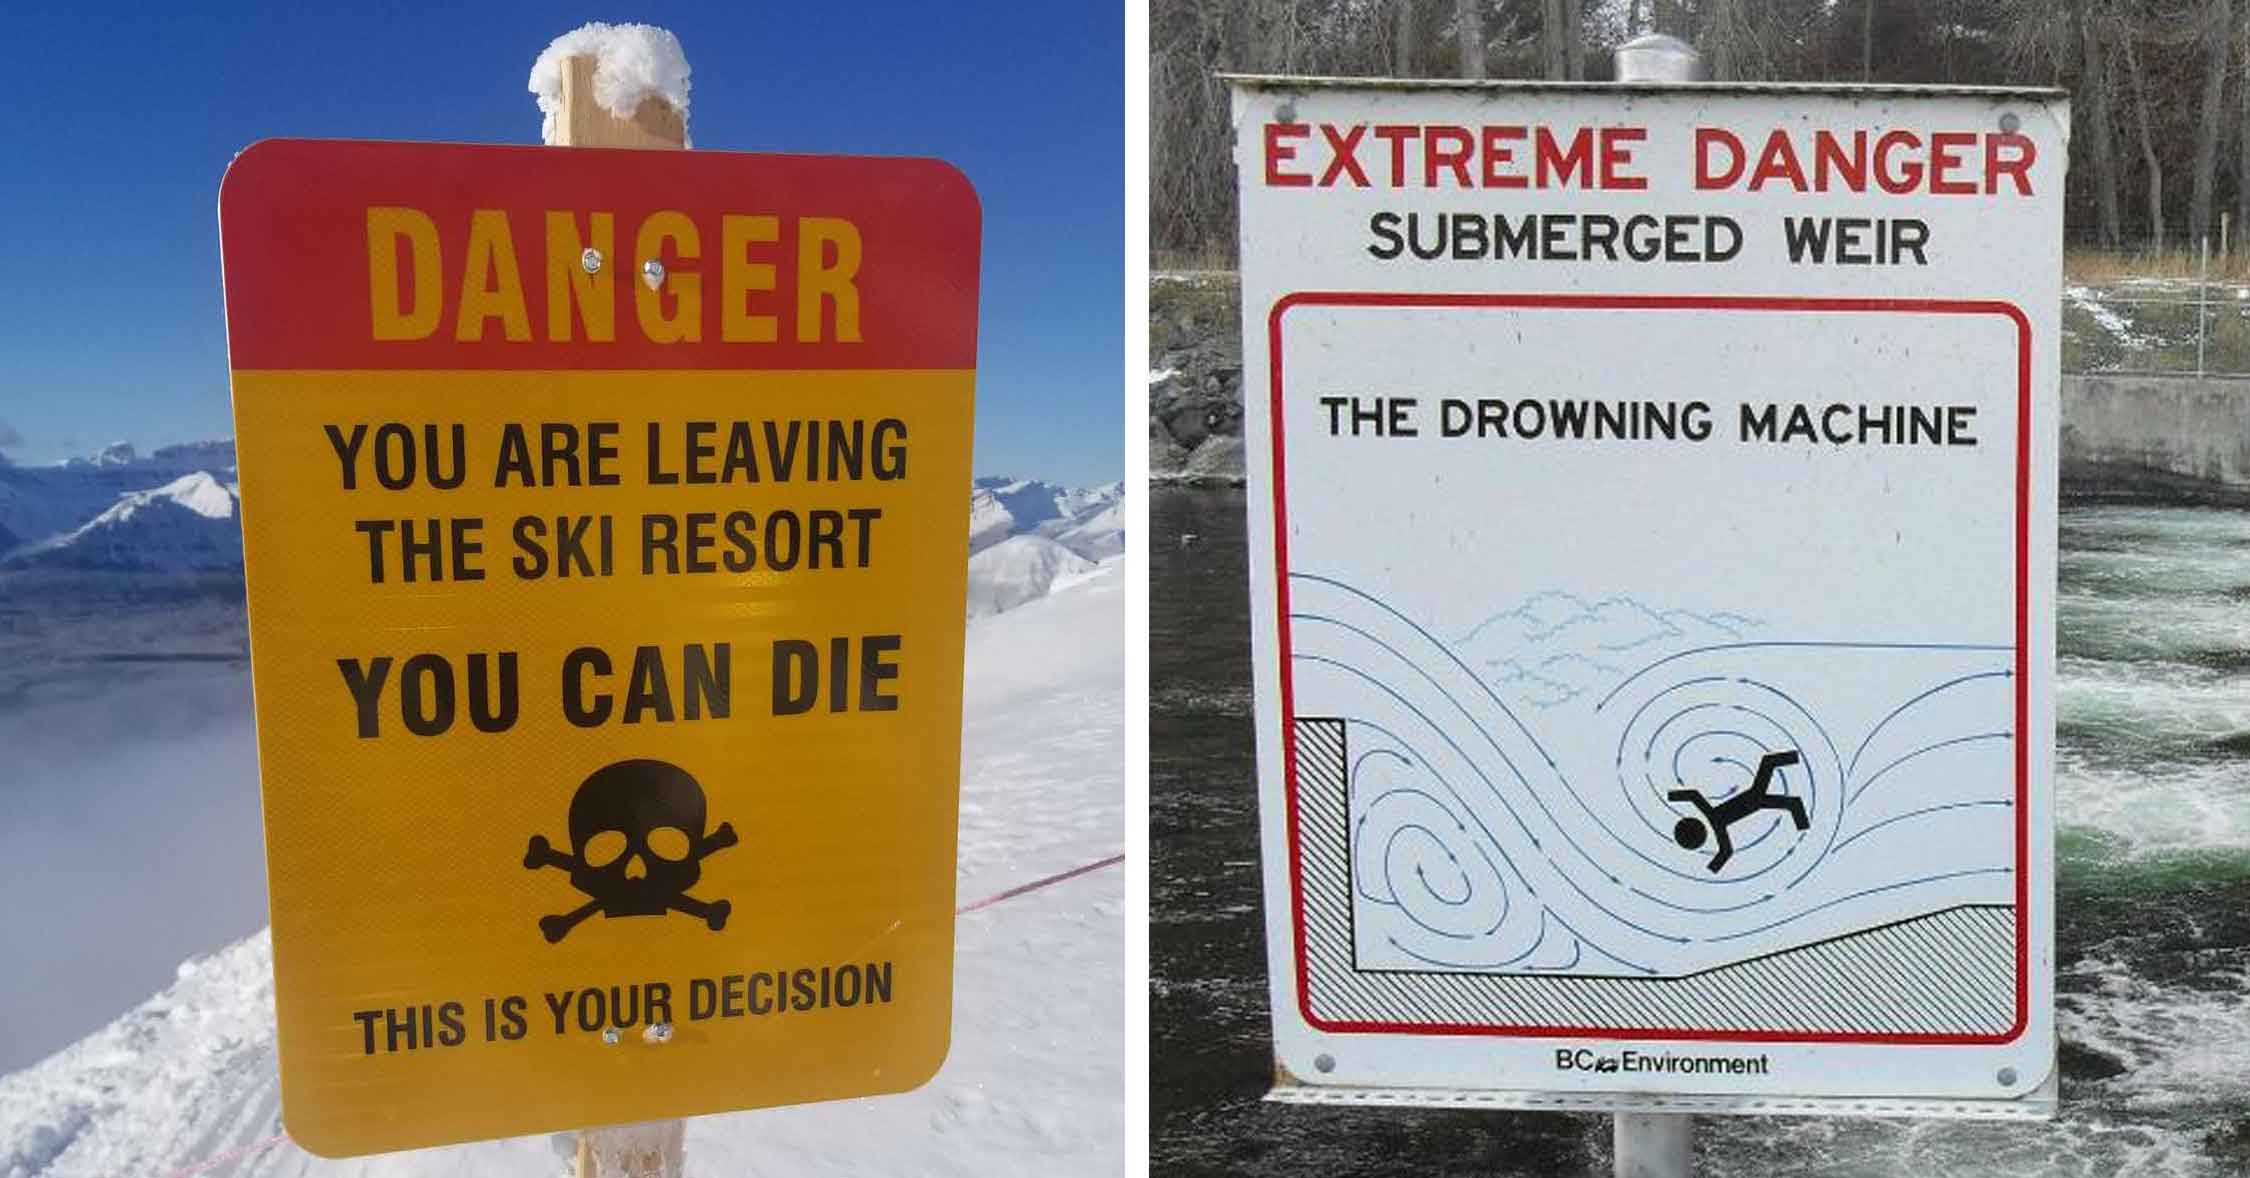 Two warning signs. Left sign: "Danger. You are leaving the ski resort. You can die. This is your decision," with a skull and crossbones. Right sign: "Extreme Danger. Submerged weir: The drowning machine," with a figure in turbulent water.